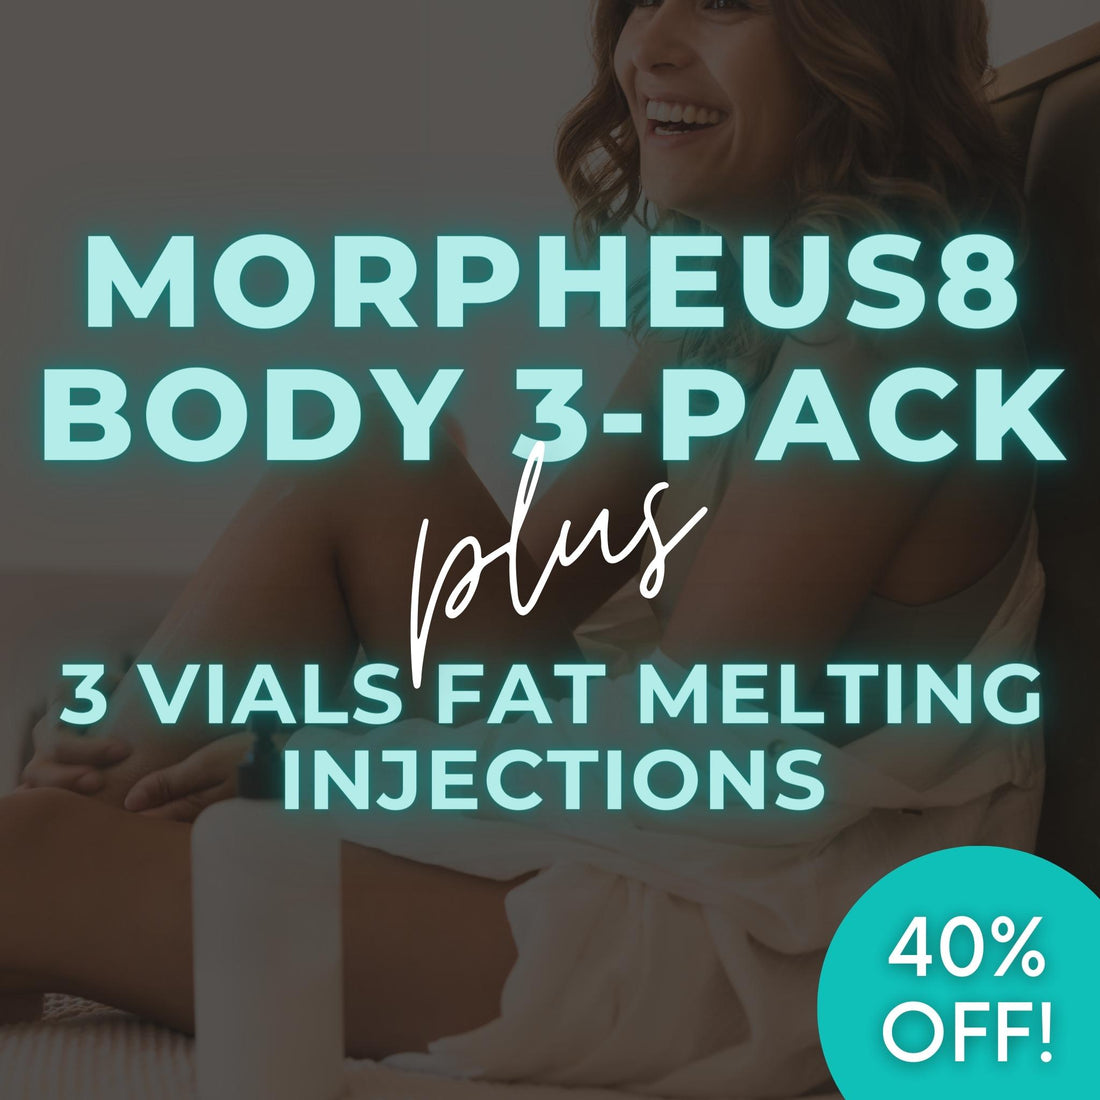 Morpheus8 Body Skin Tightening 3-Pack + 3 Vials Fat Melting Injections